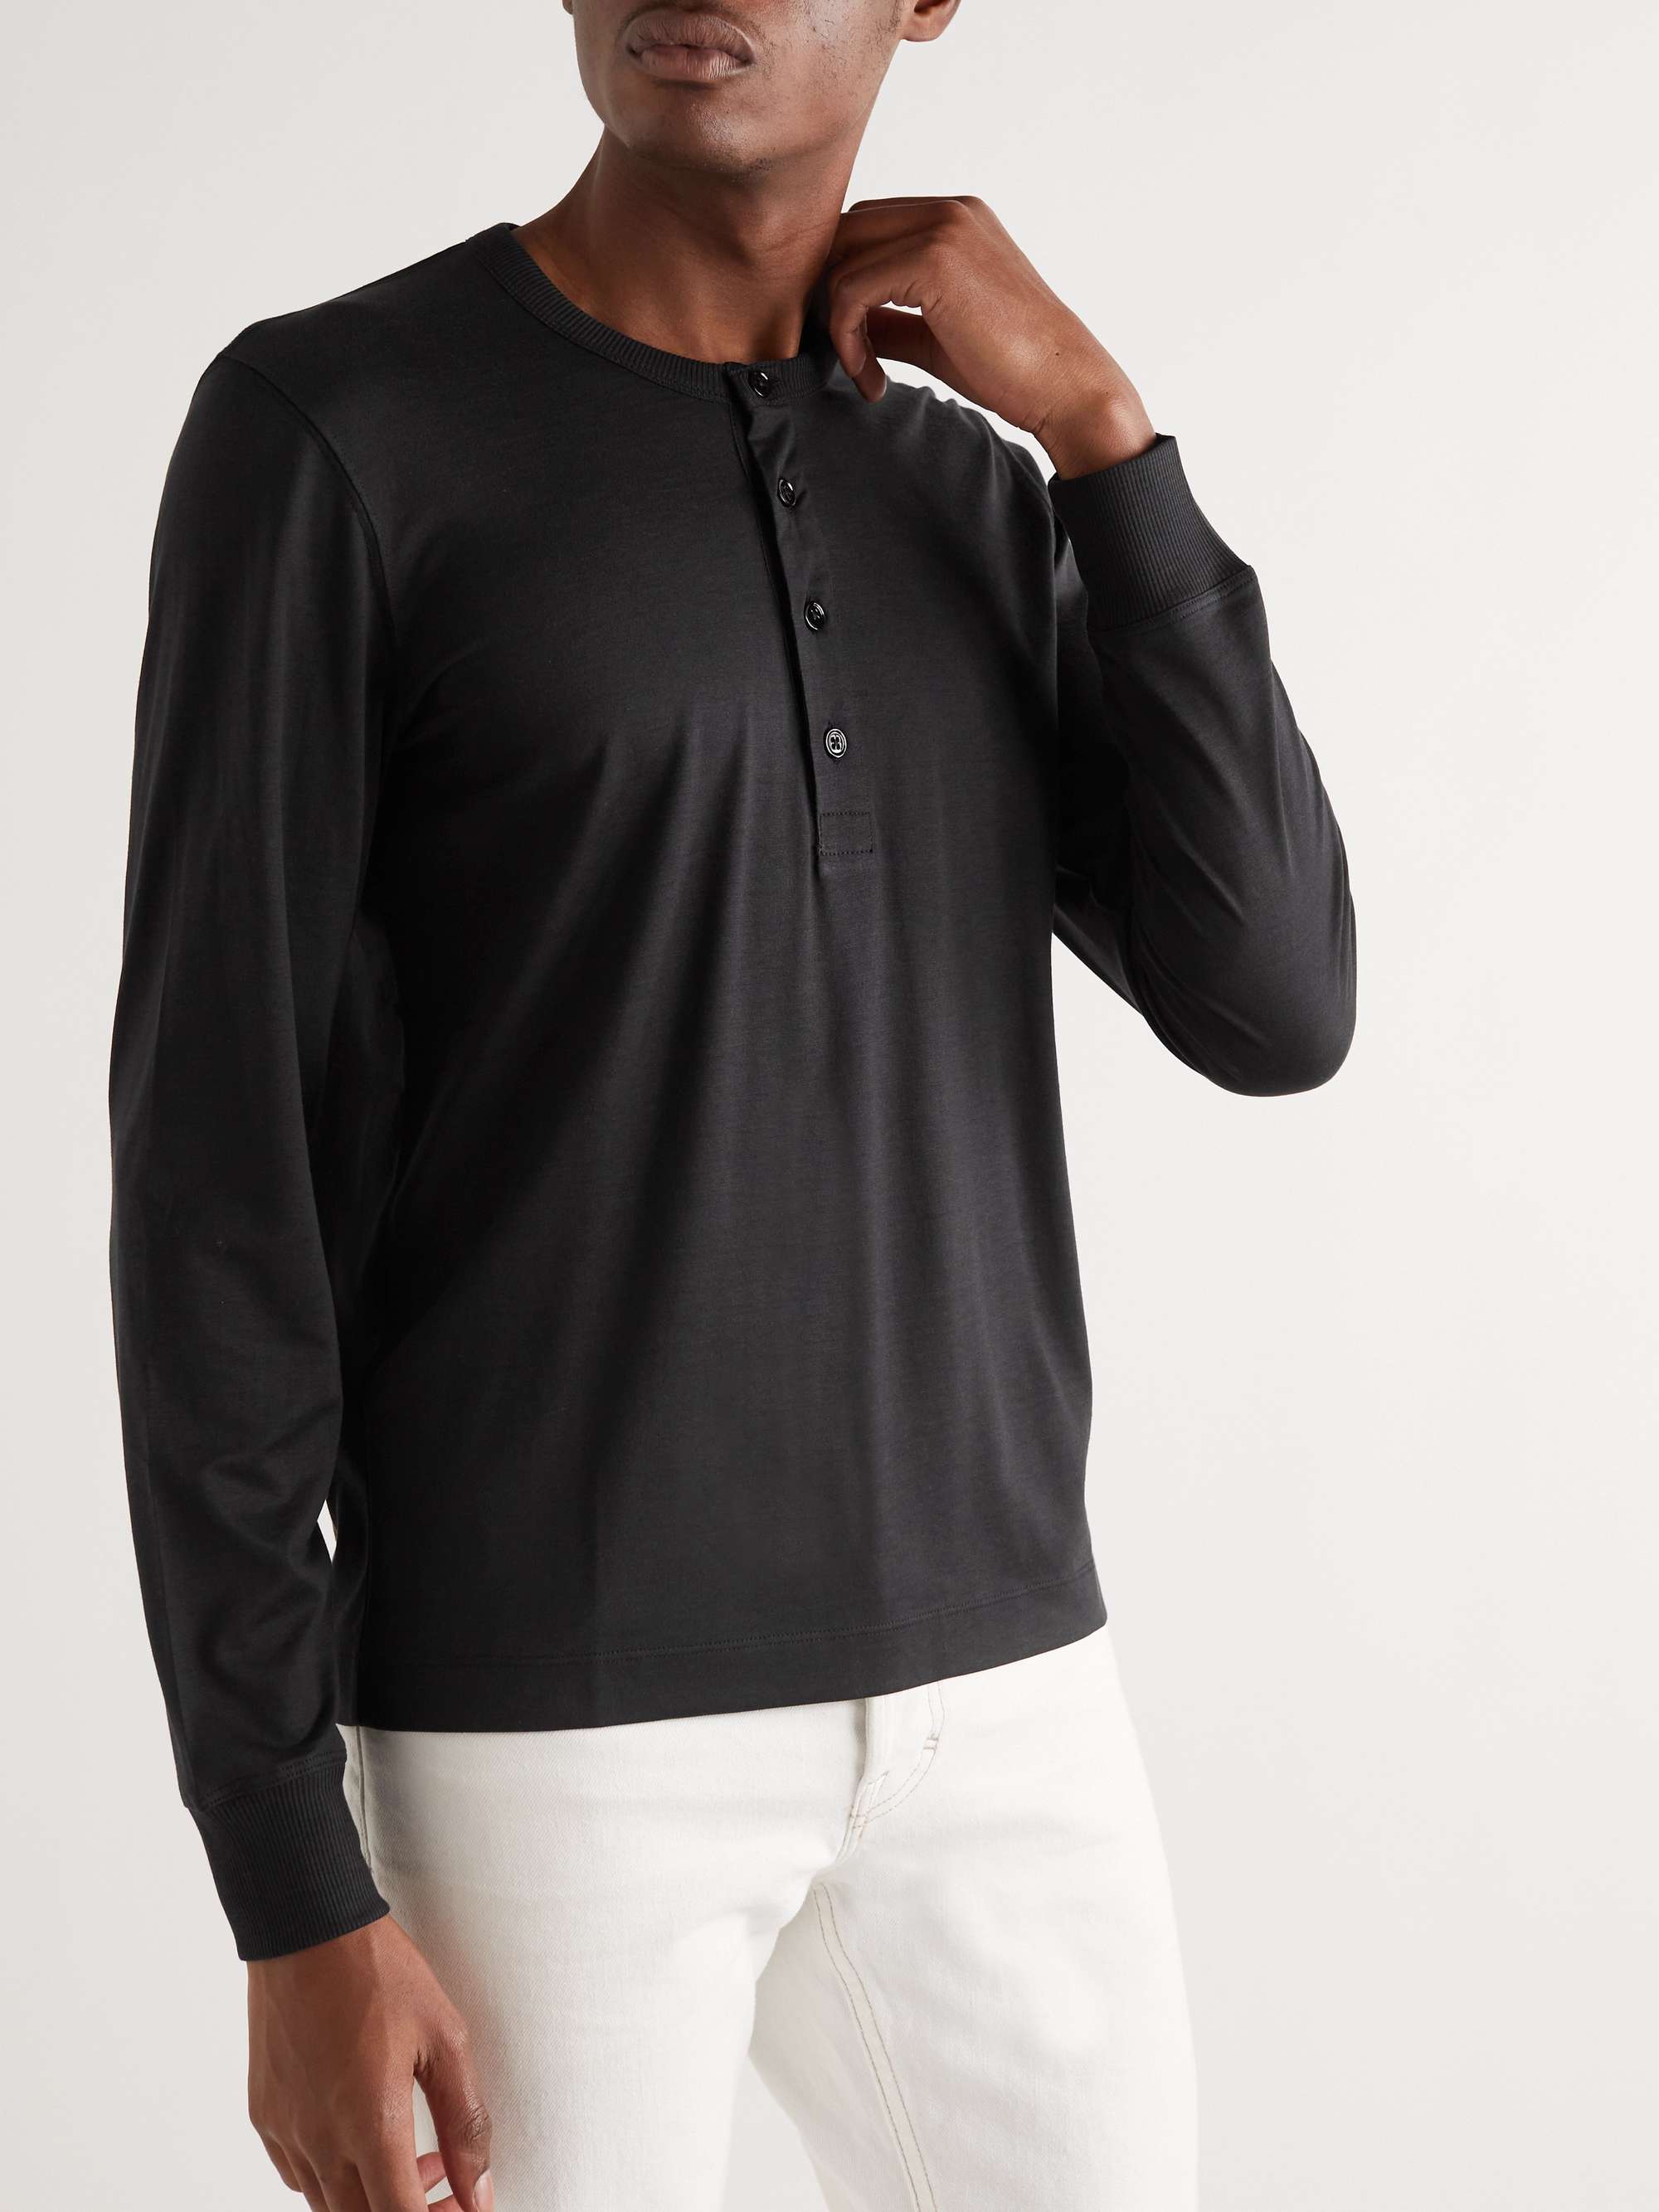 TOM FORD Silk and Cotton-Blend Jersey Henley T-Shirt